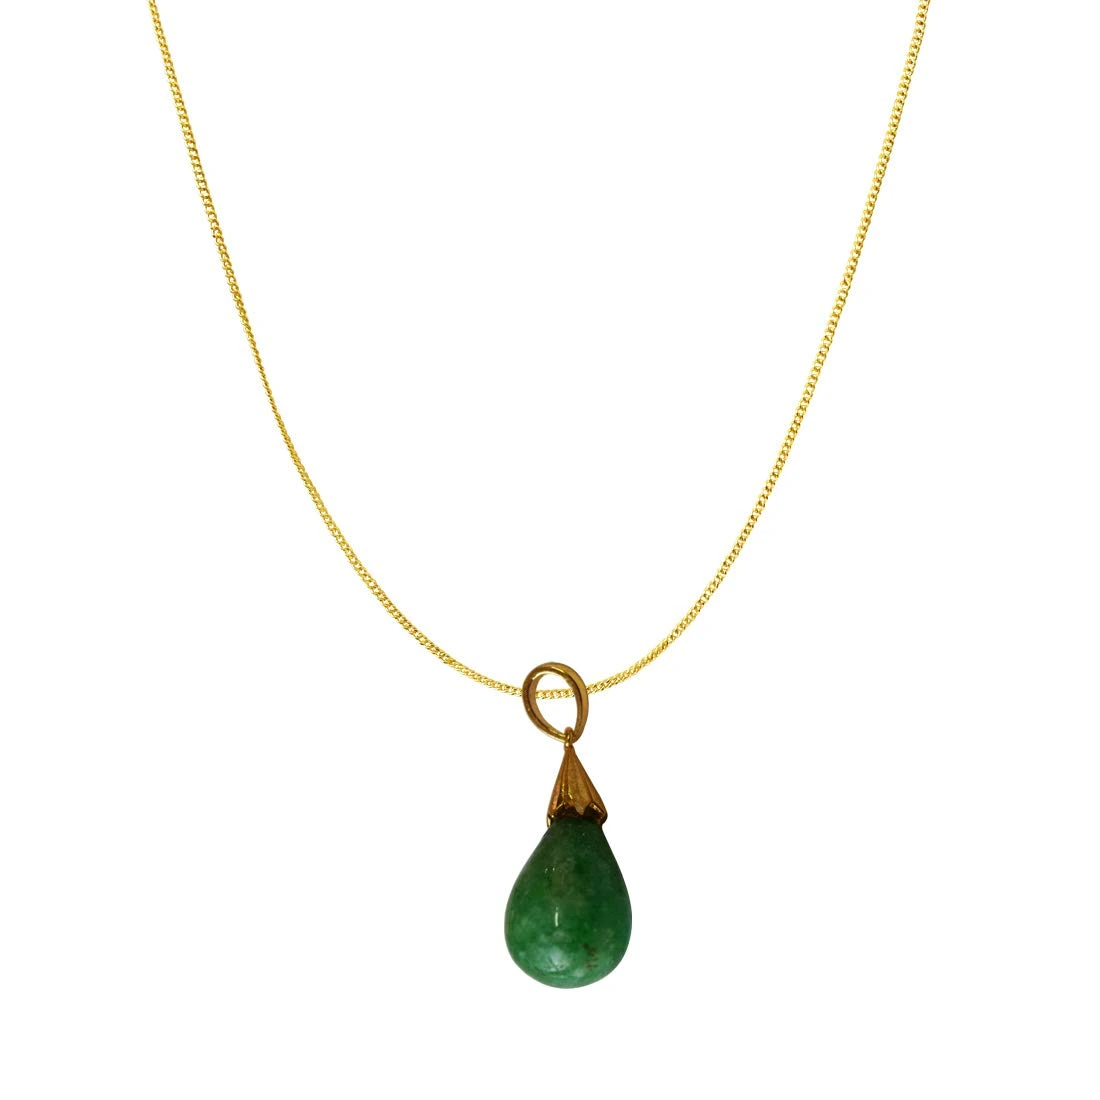 13.68 cts Real Drop Green Onyx Sterling Silver Pendant with Gold Finished Chain for Women (SDS319-13.68cts)